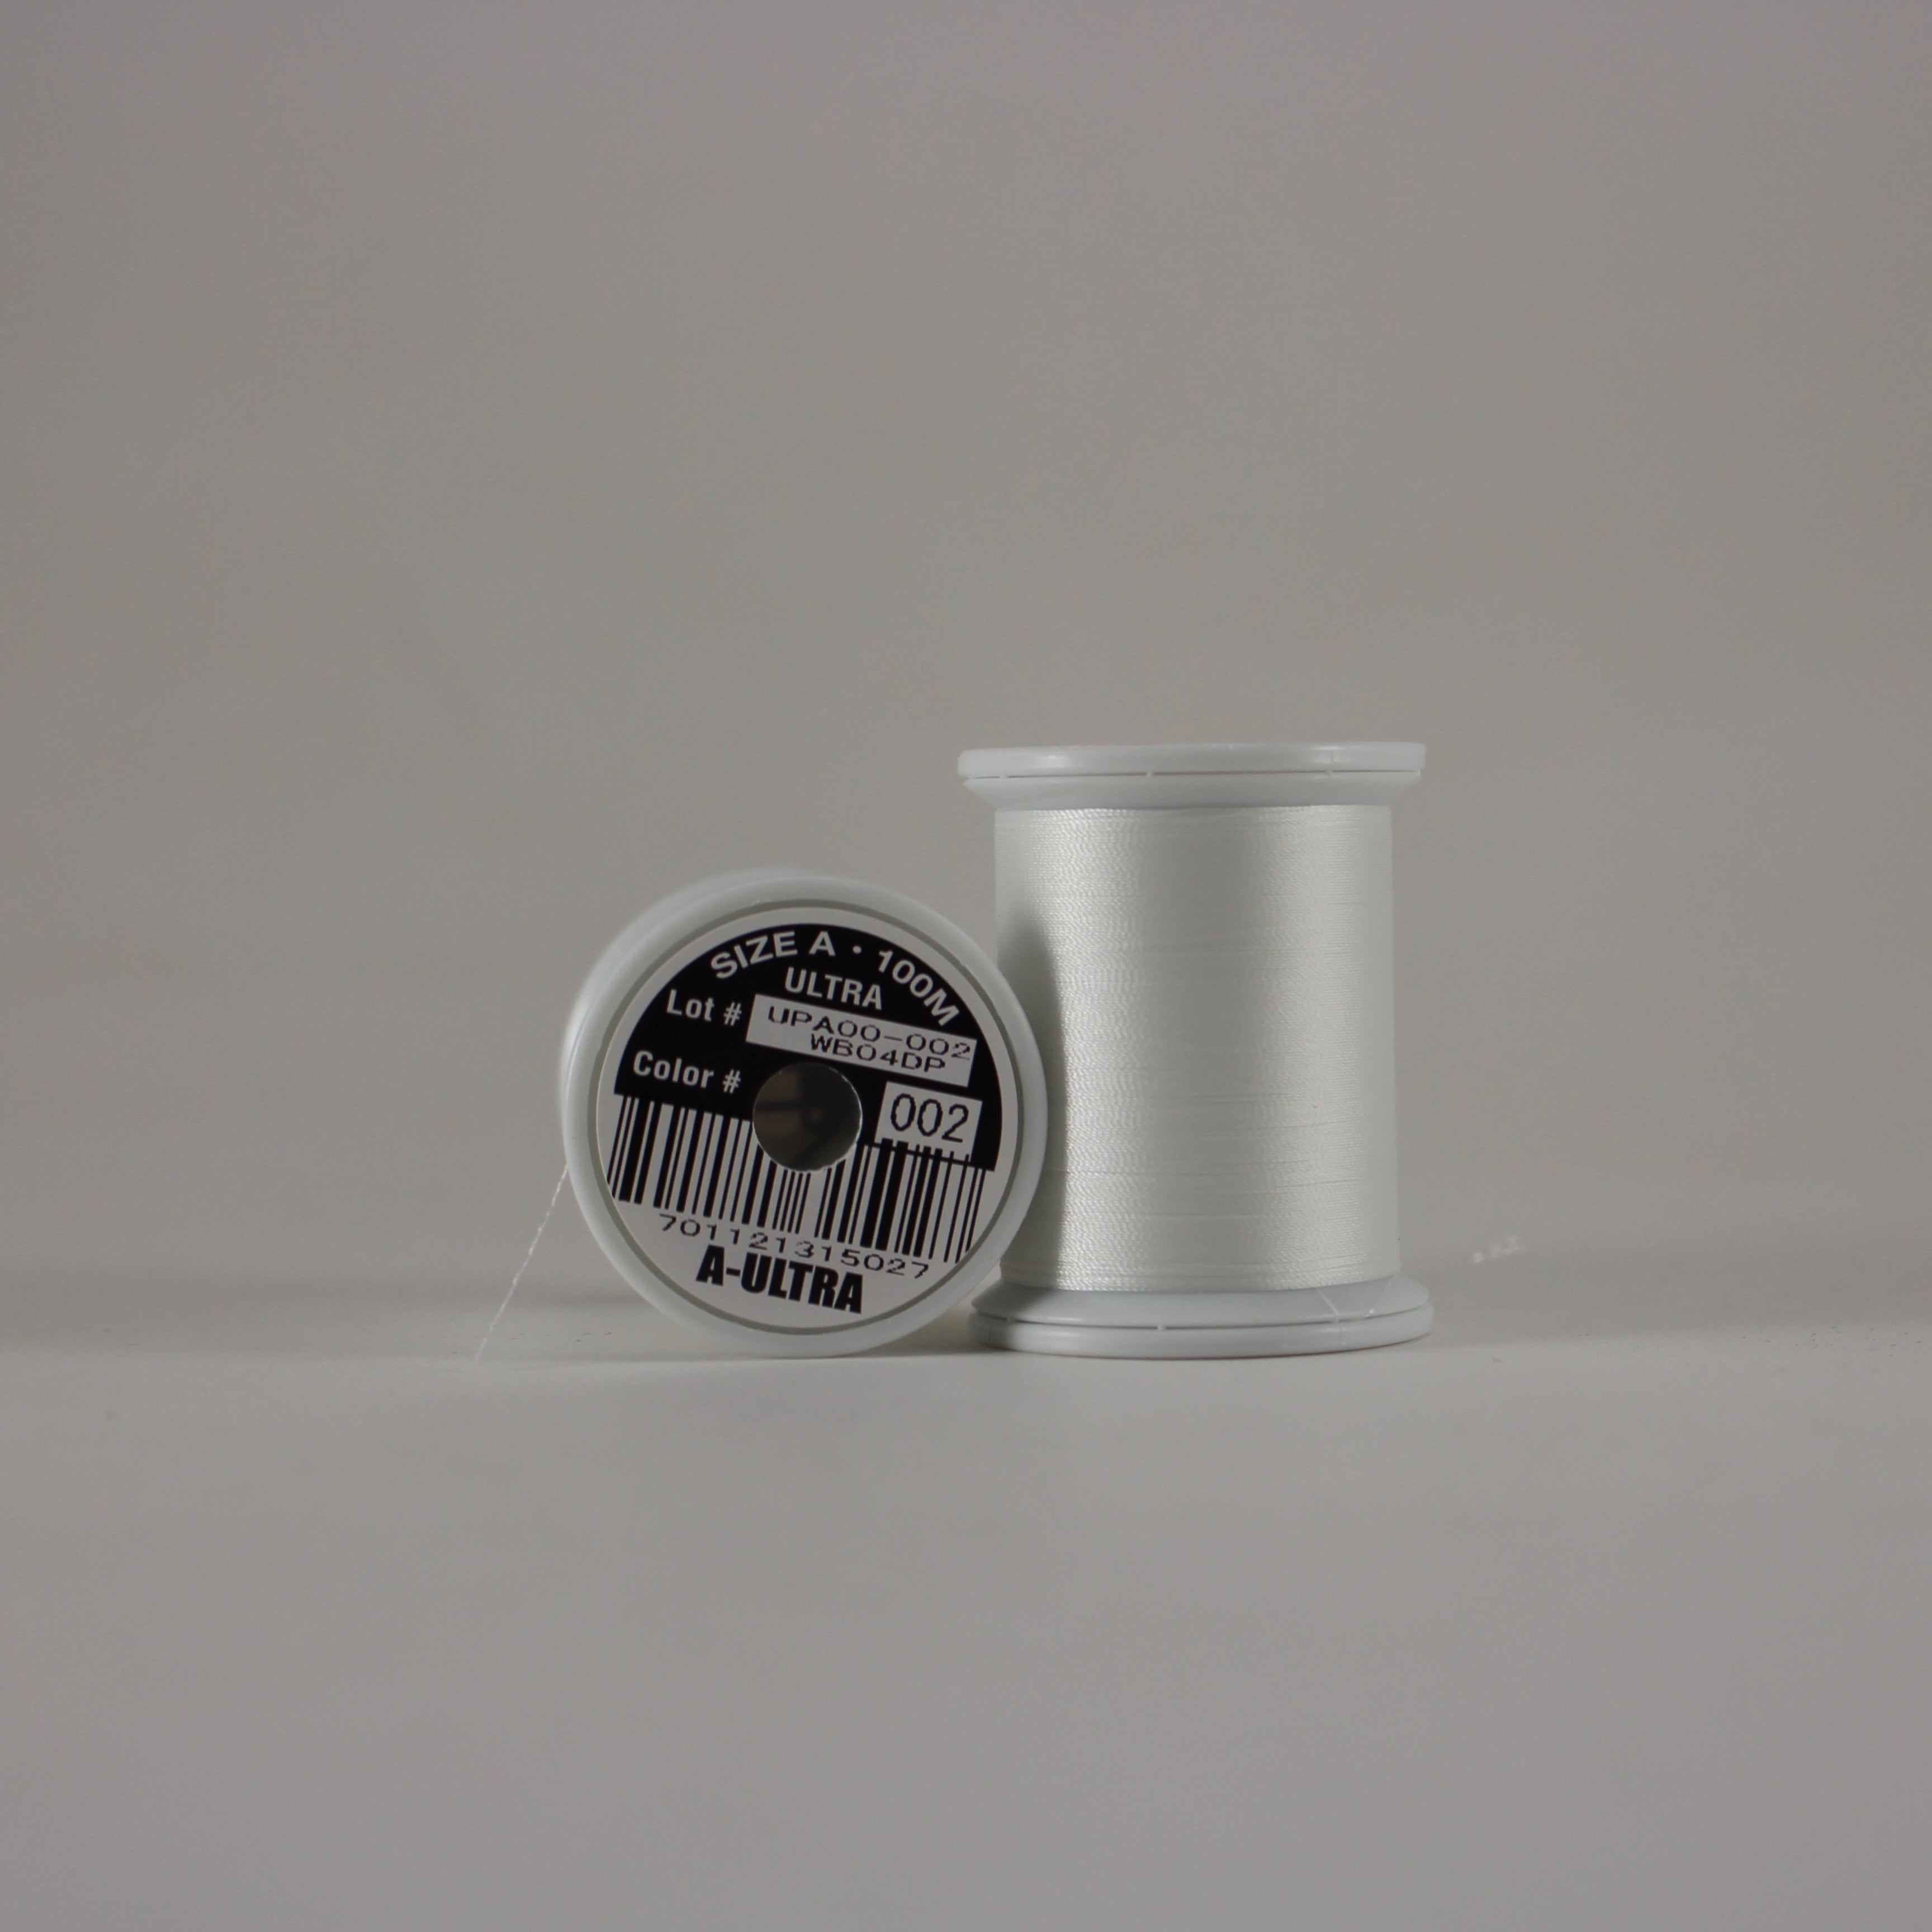 Fuji Ultra Poly rod wrapping thread in White #002 (Size A 100m spool) –  Proof Fly Fishing